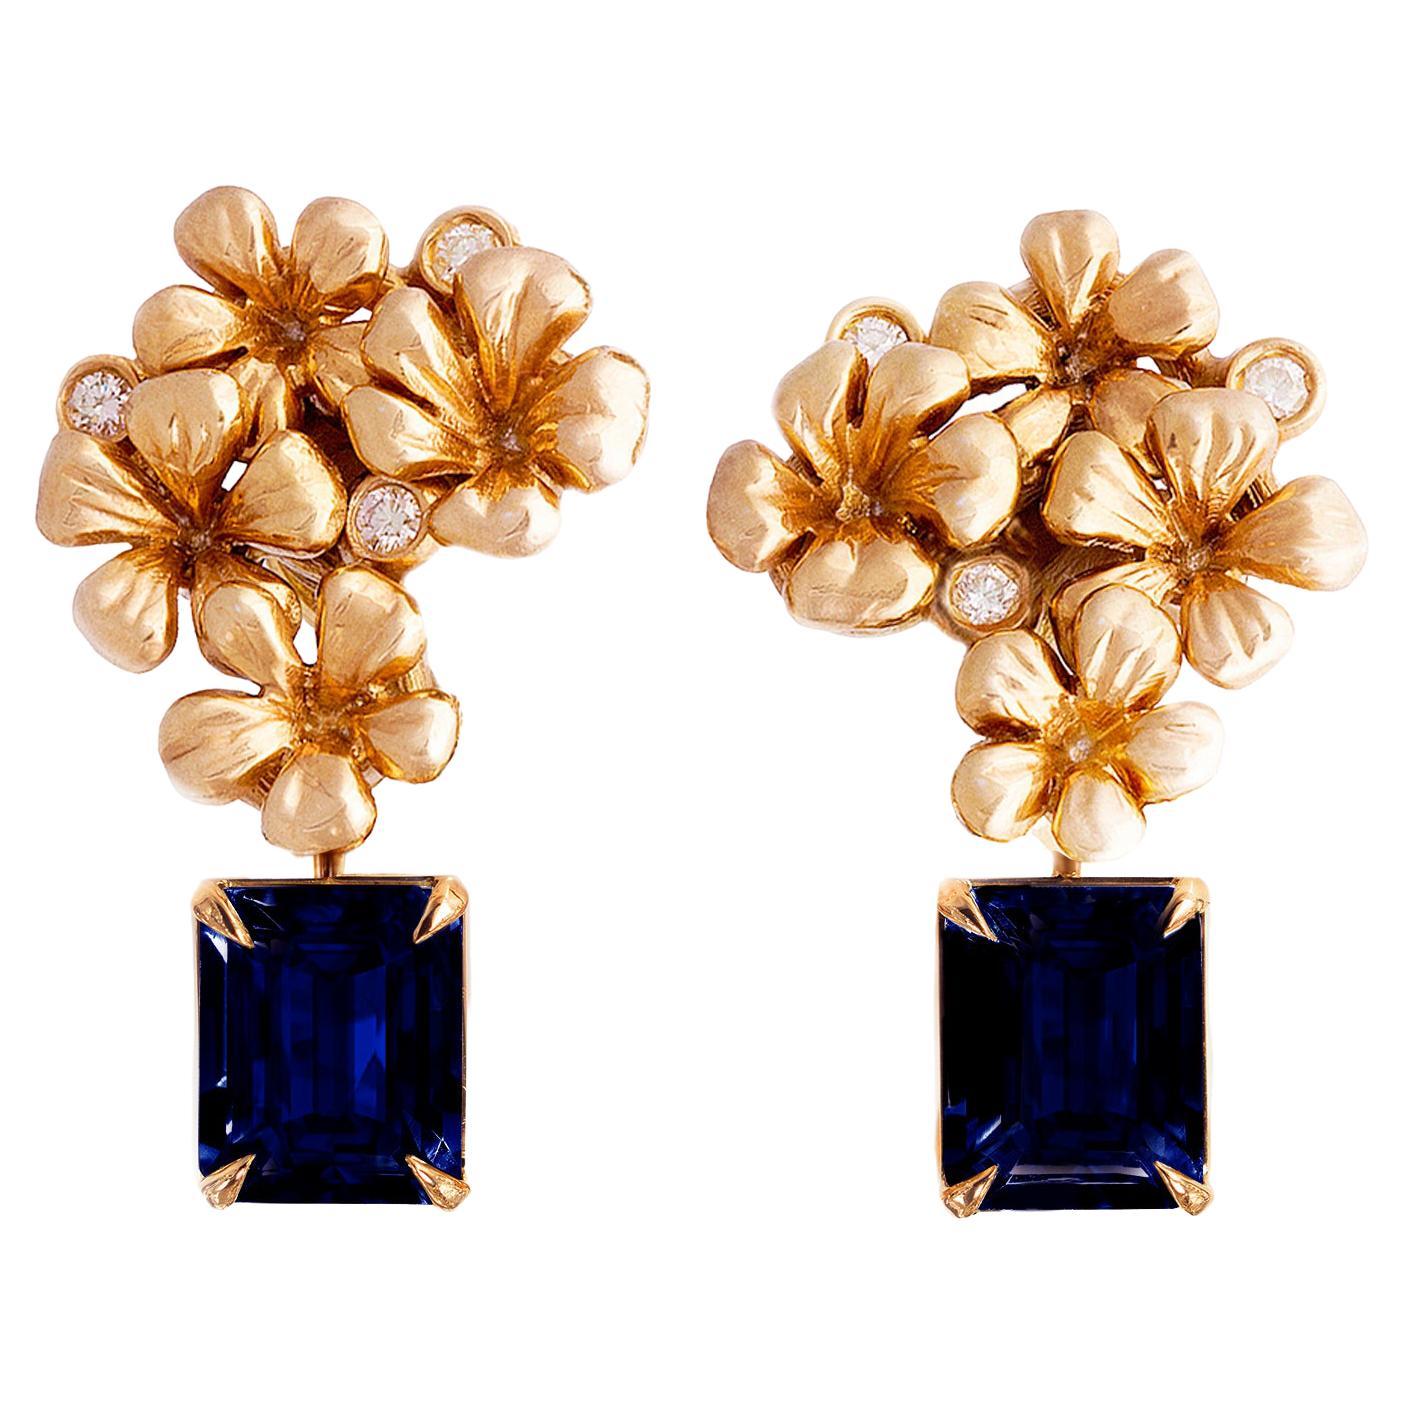 Contemporary Stud Earrings in Eighteen Karat Rose Gold with Sapphire and Diamond